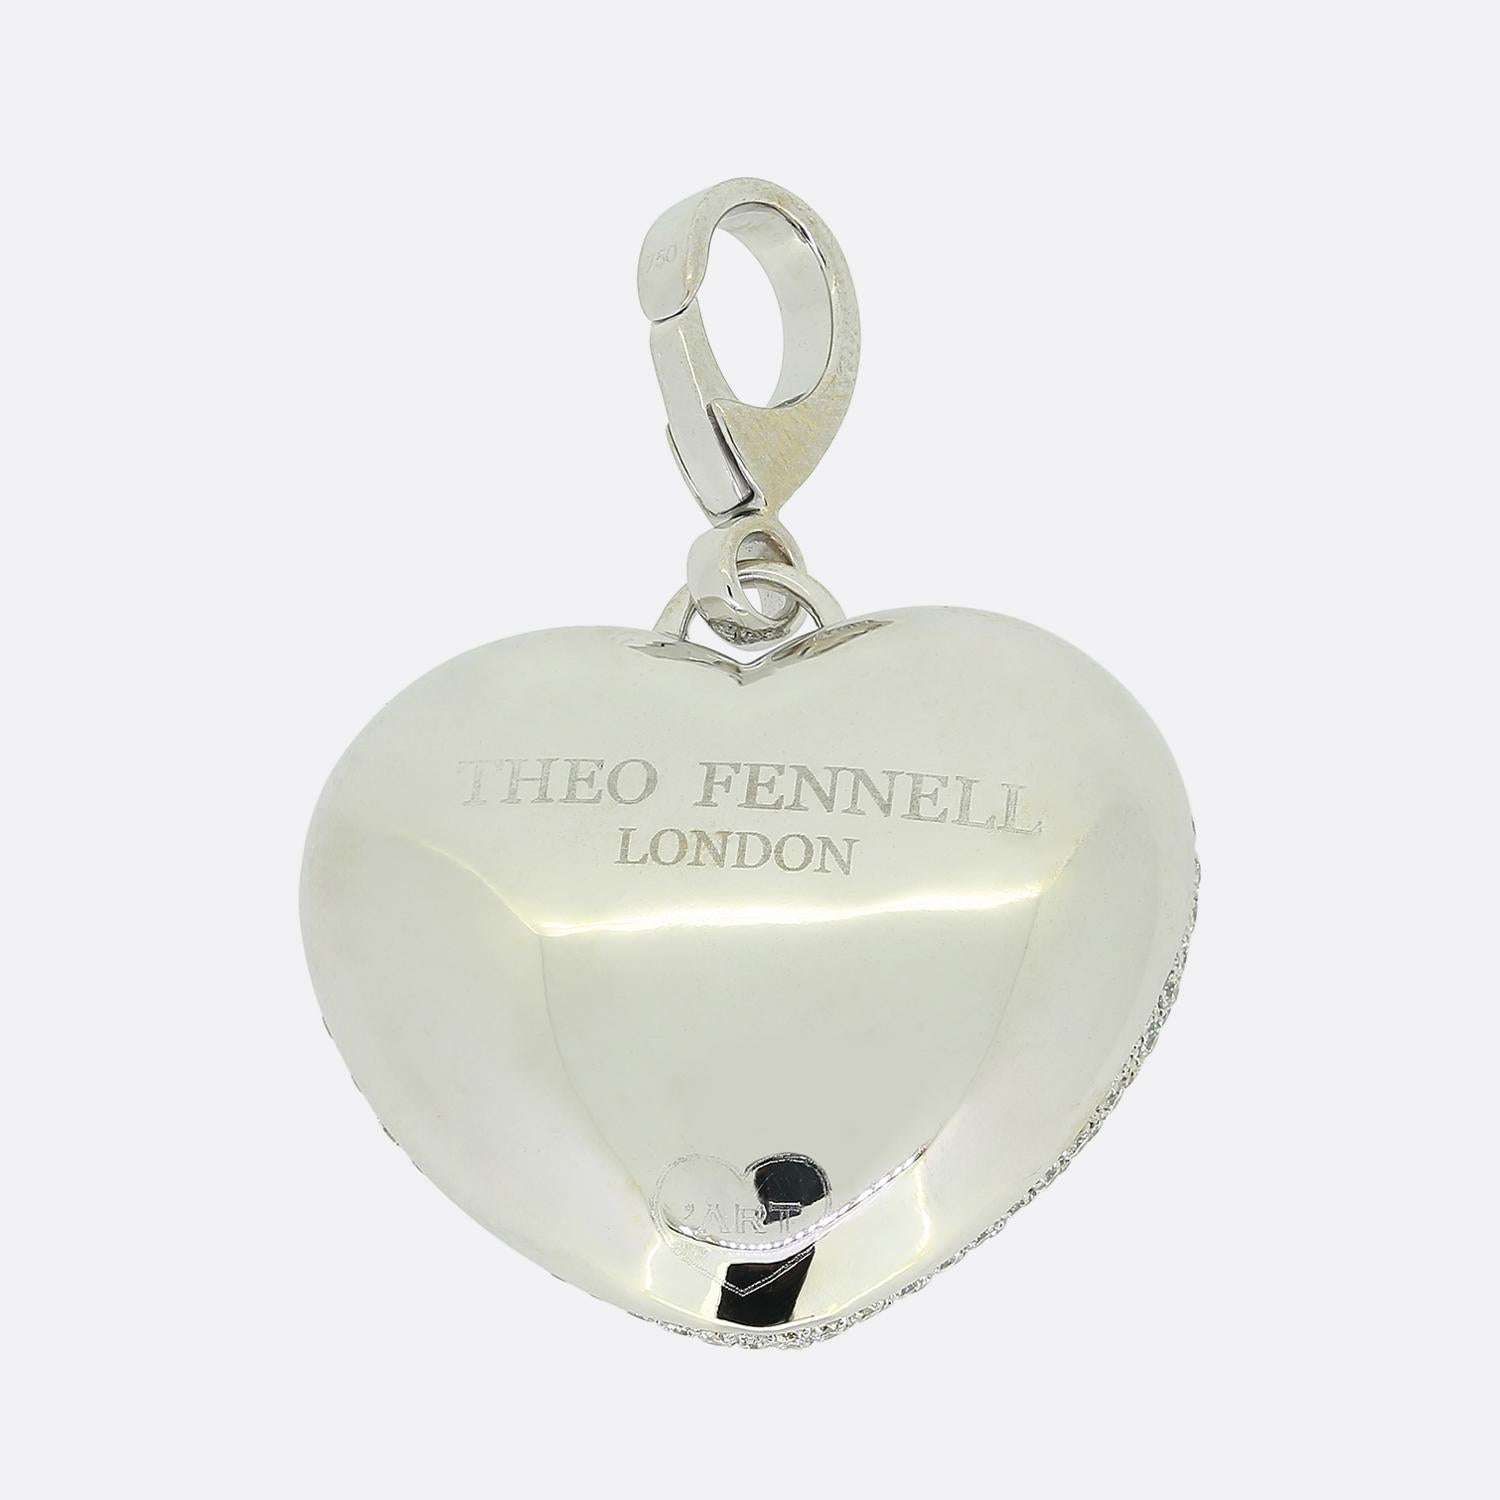 Here we have a large diamond pendant from renowned jewellery designer, Theo Fennell. This piece has been crafted from 18ct white gold into the shape of a love heart and pave set with a vast array of perfectly matched round brilliant cut diamonds.